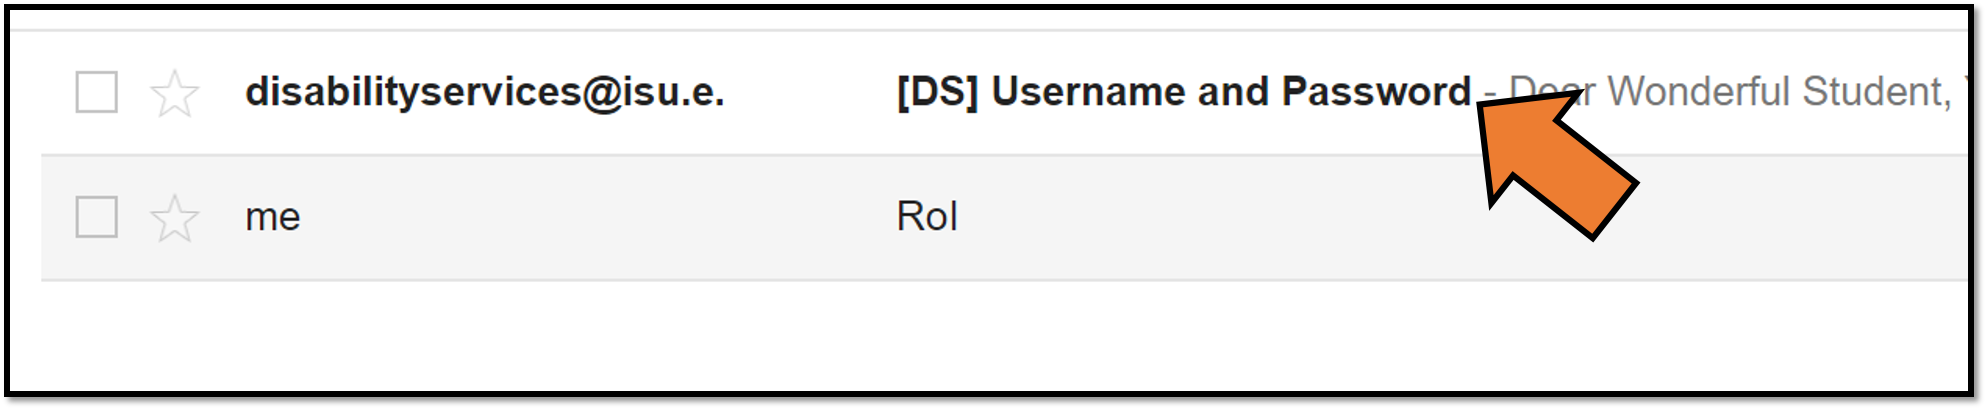 Email containing Username and Password for DS Services Portal